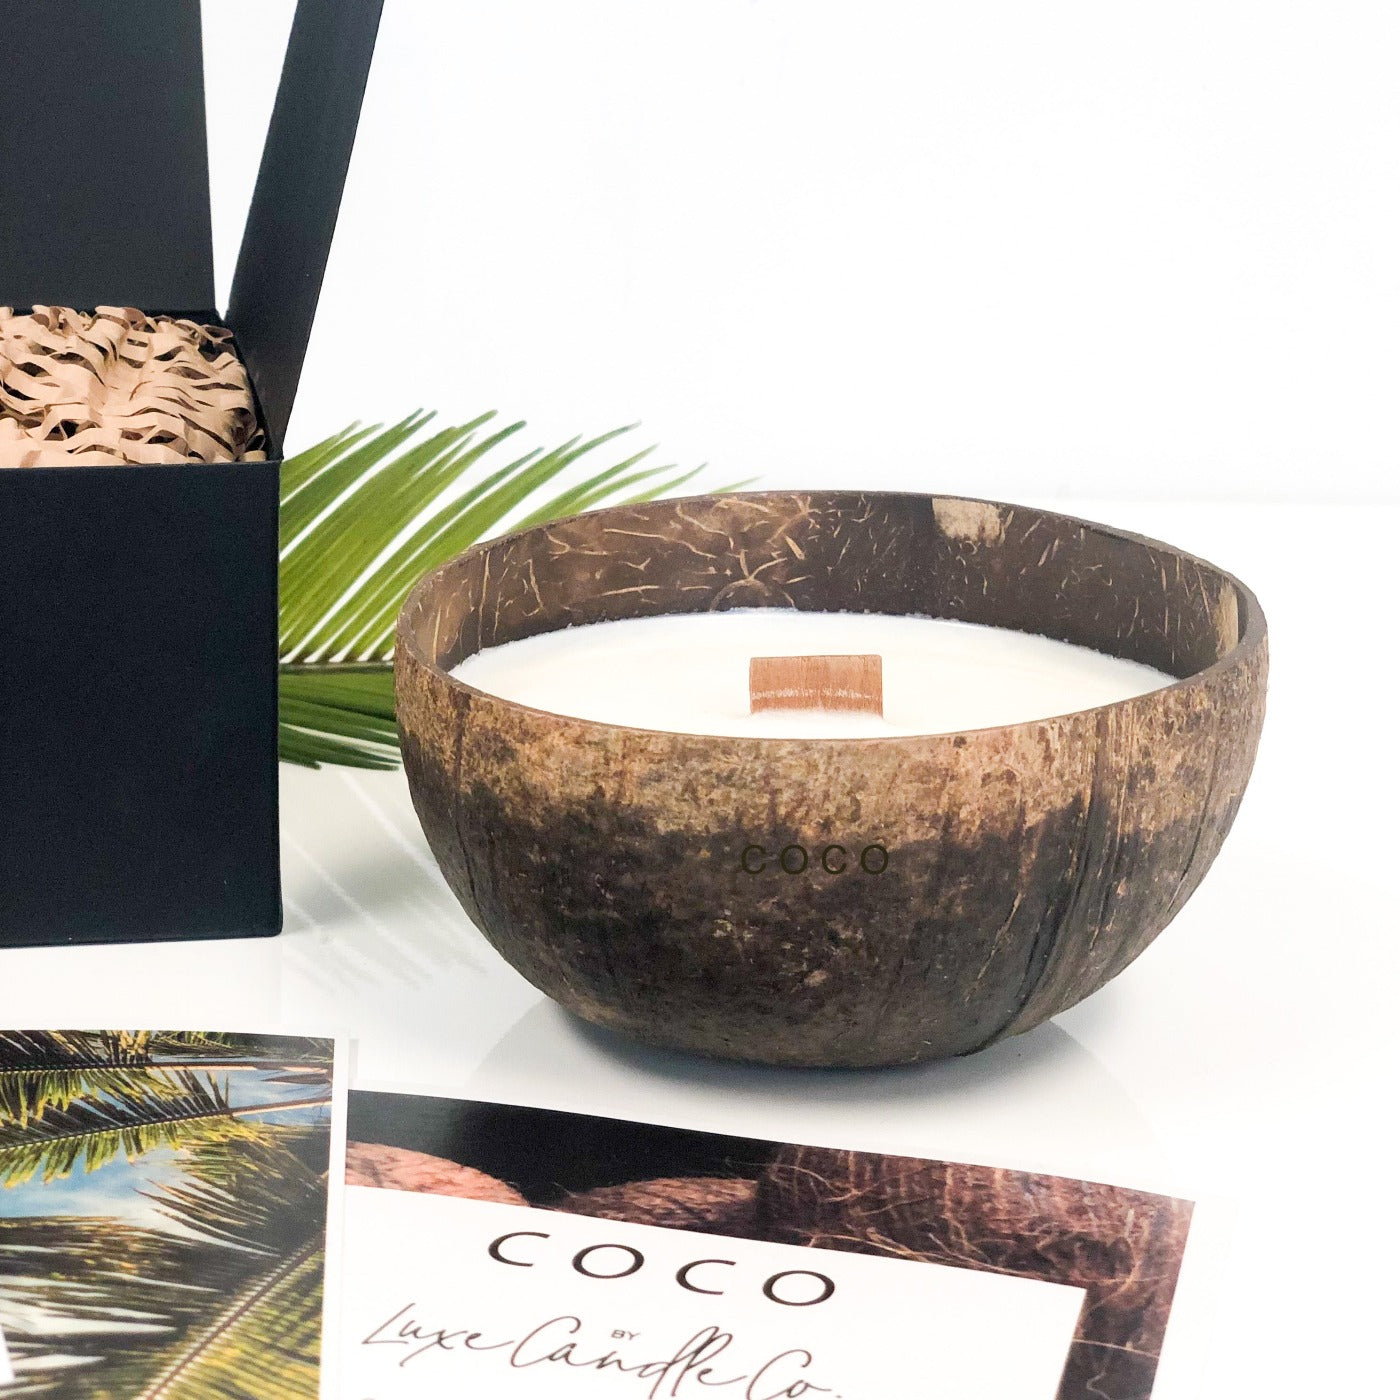 Thai coconut gift set with wood wick coconut bowl | Best gift idea for coconut lover UK